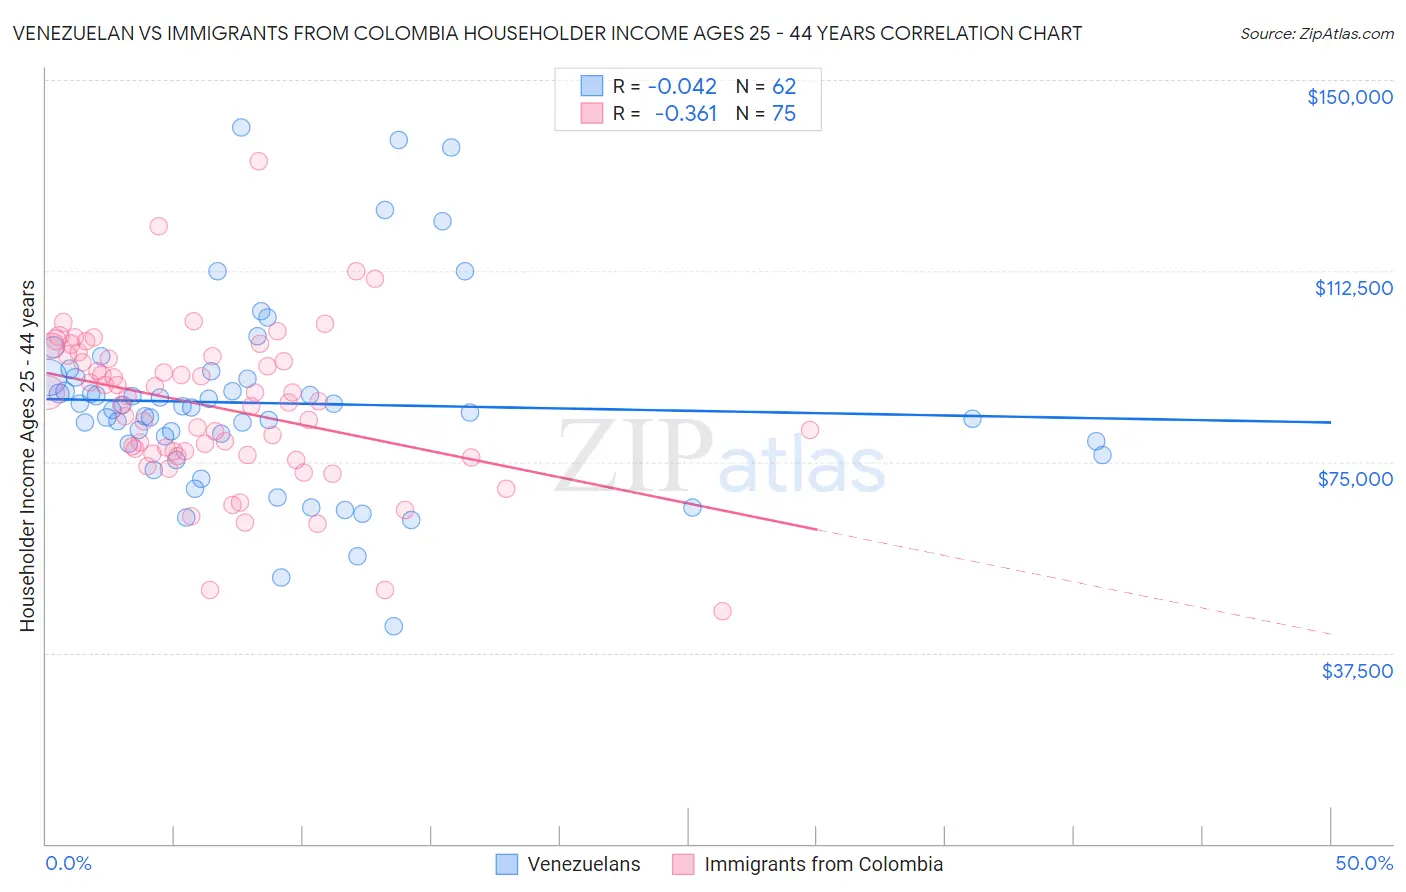 Venezuelan vs Immigrants from Colombia Householder Income Ages 25 - 44 years